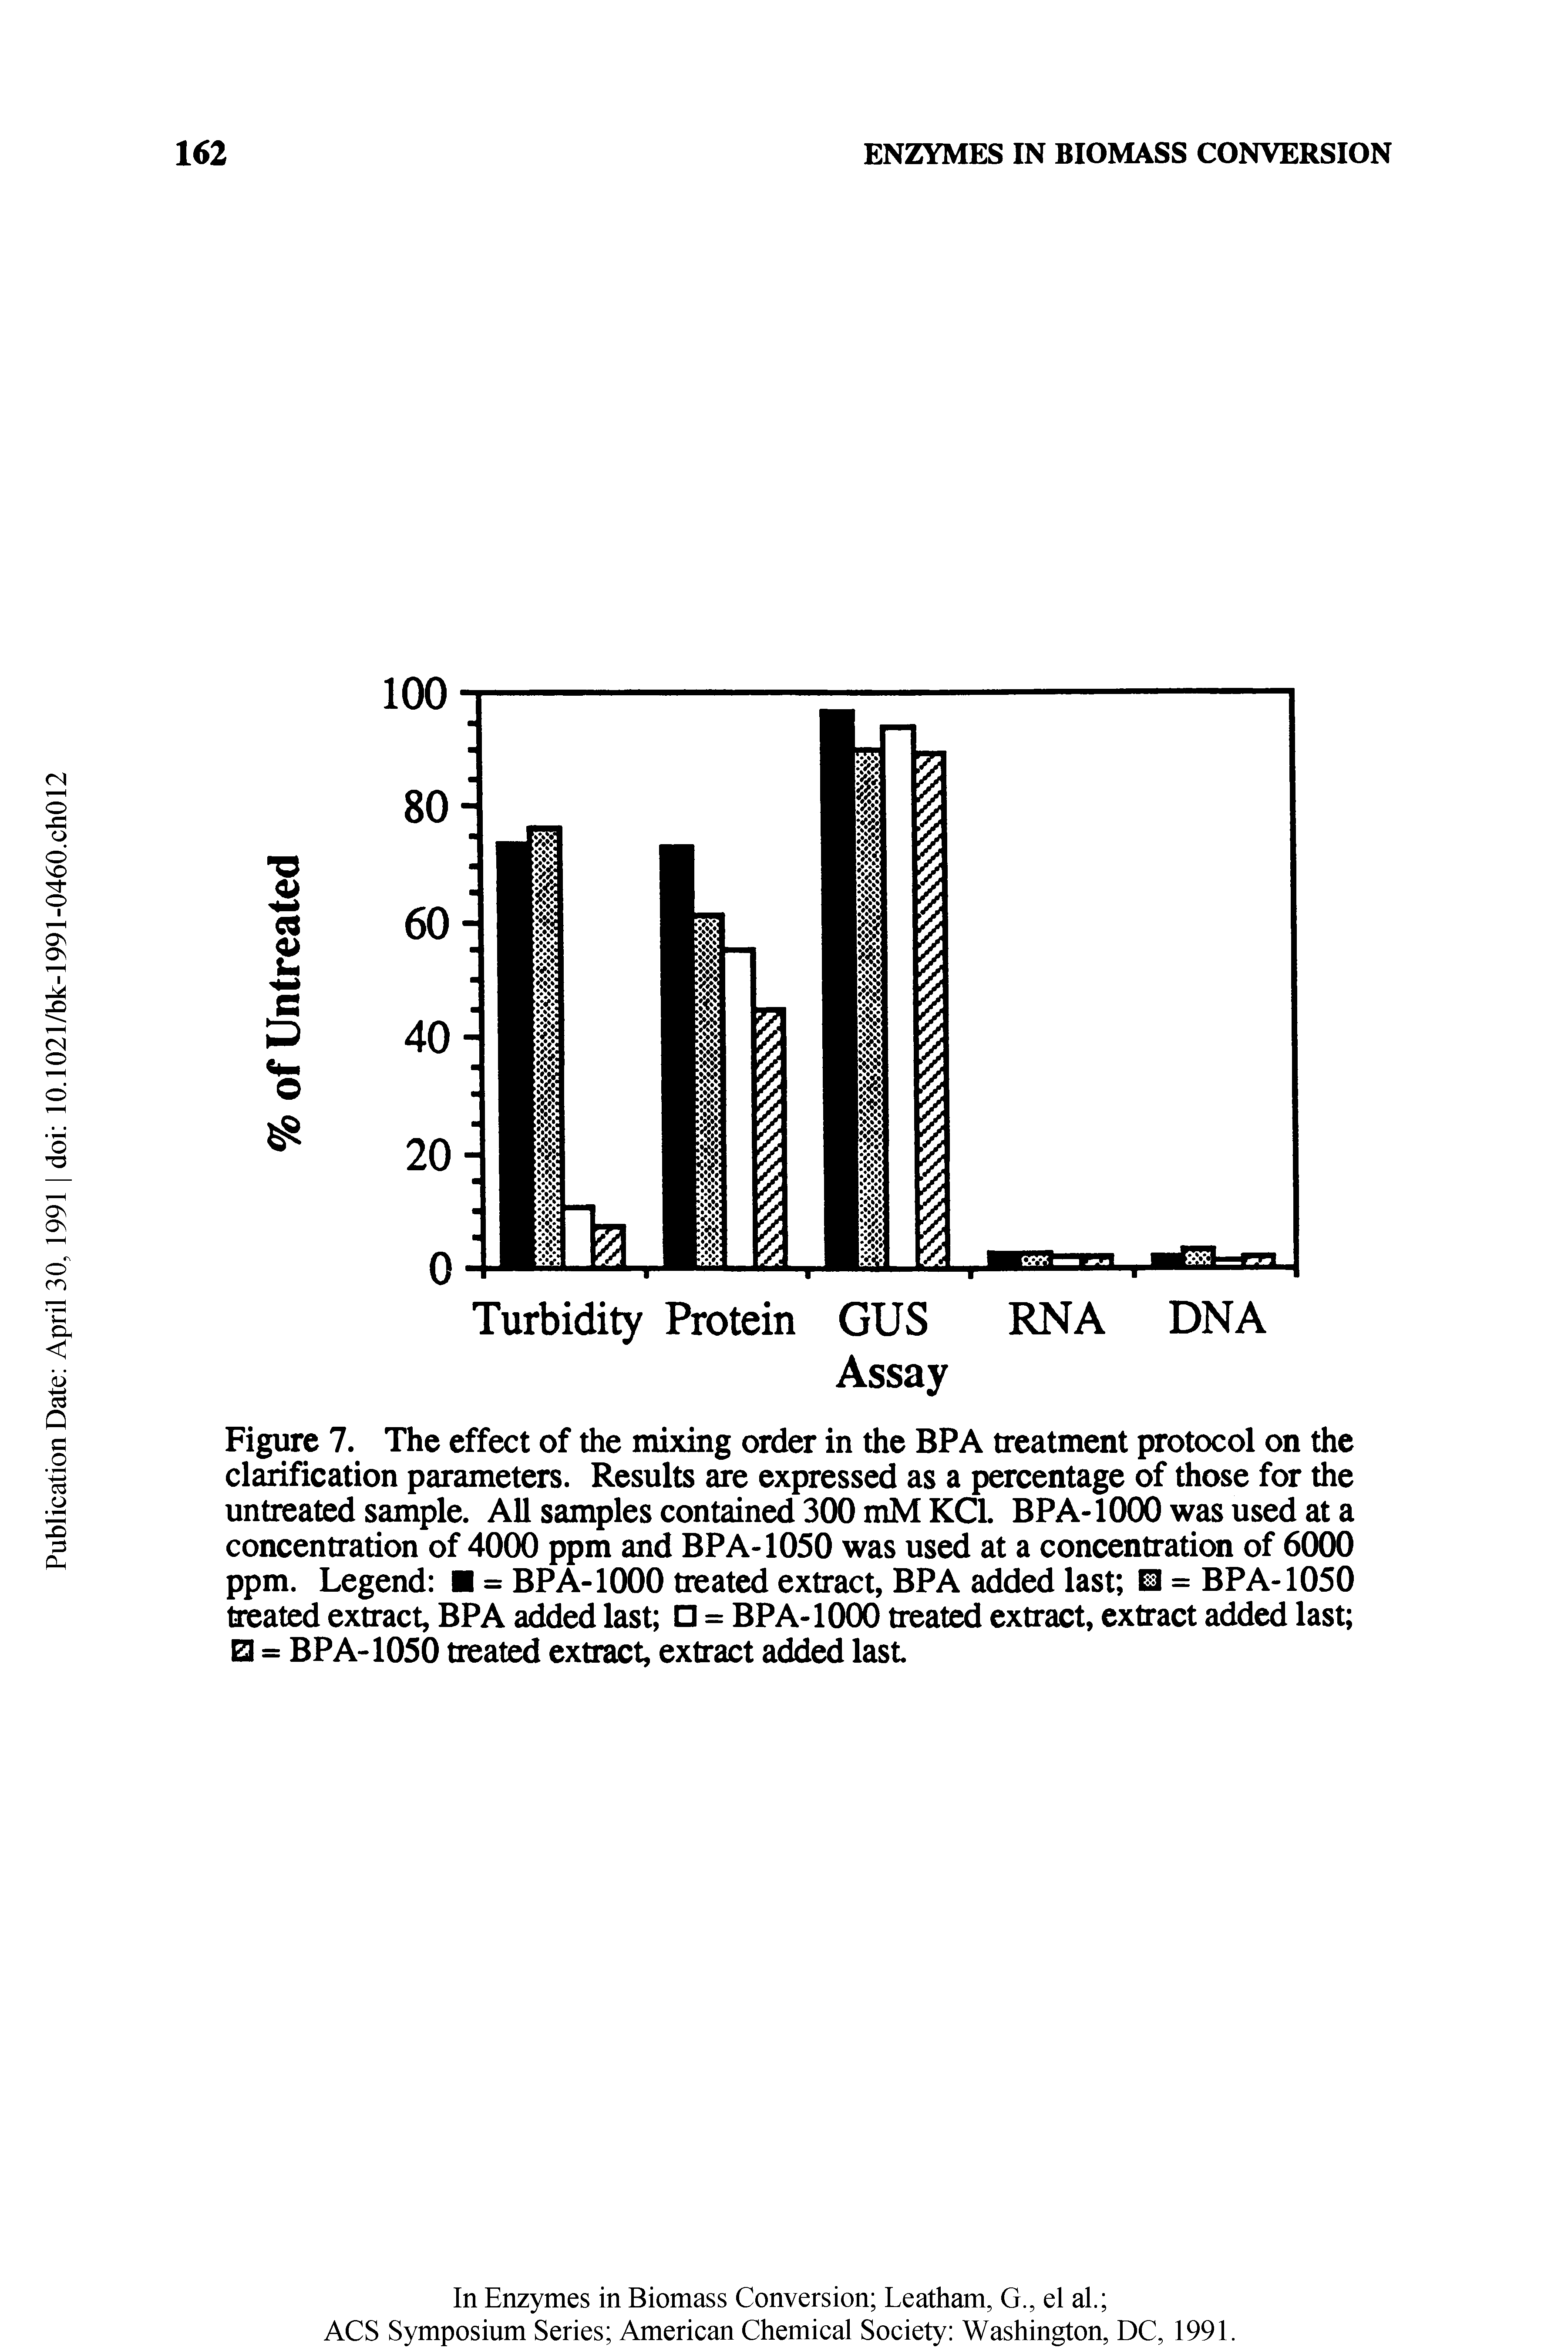 Figure 7. The effect of the mixing order in the BPA treatment protocol on the clarification parameters. Results are expressed as a percentage of those for the untreated sample. All samples contained 300 mM KCL BPA-1000 wasusedata concentration of 4000 ppm and BPA-1050 was used at a concentration of 6000 ppm. Legend = BPA-1000 treated extract, BPA added last El = BPA-1050 treated extract, BPA added last = BPA-1000 treated extract, extract added last Q = BPA-1050 treated extract, extract added last...